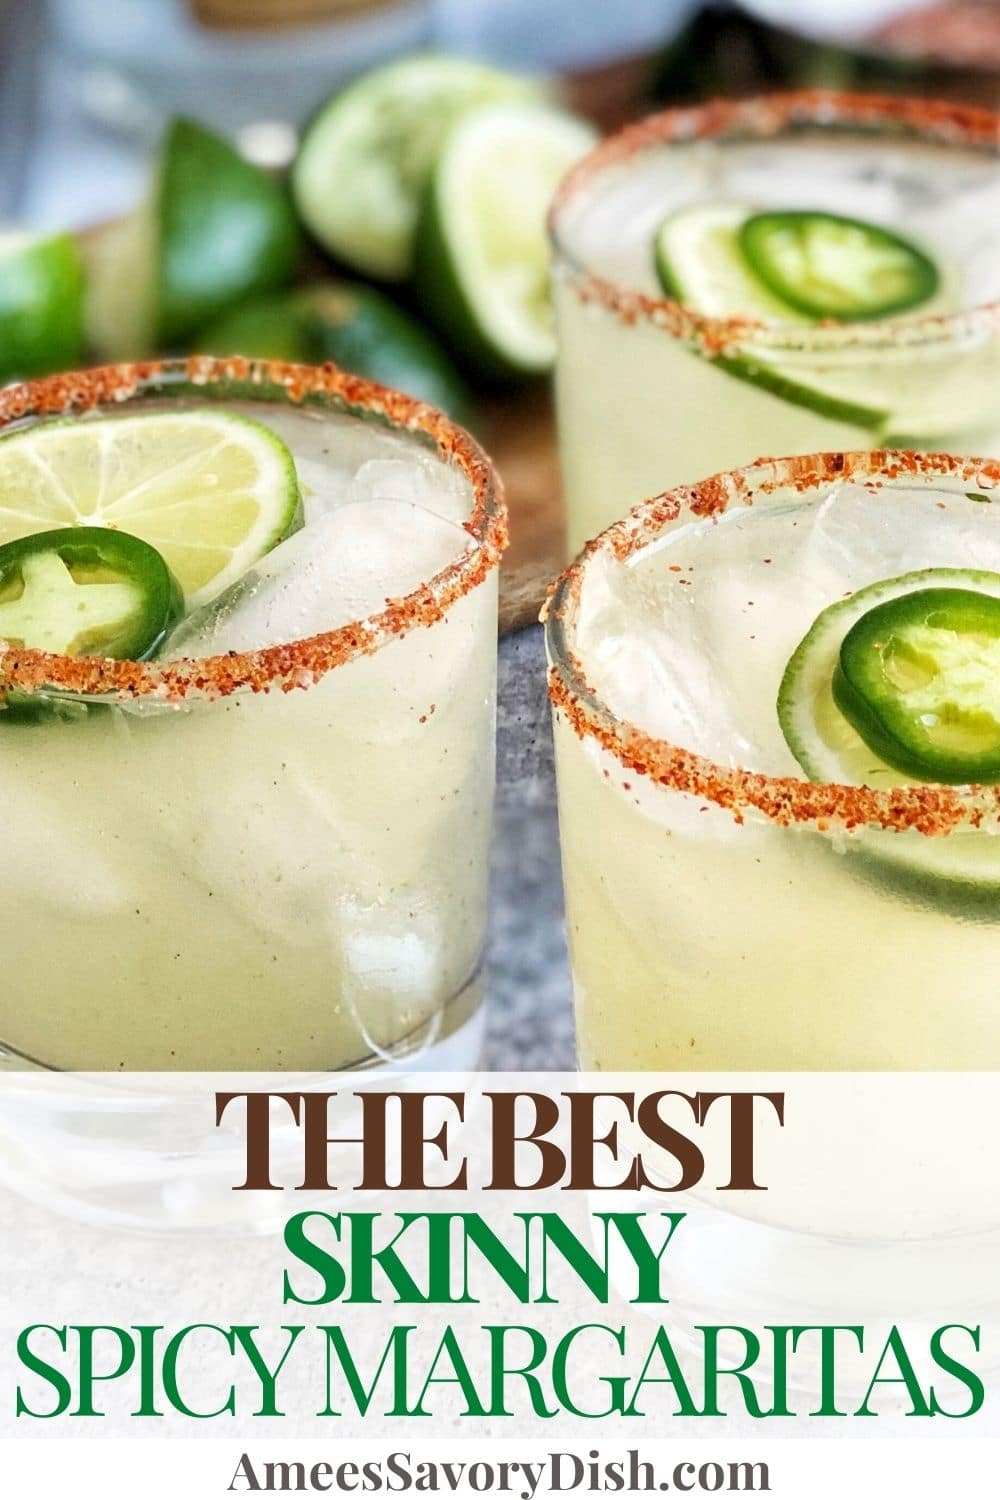 This recipe for skinny spicy margaritas is the perfect blend of sweet, tart, and heat with a touch of fizz for a refreshing and flavorful cocktail.   via @Ameessavorydish